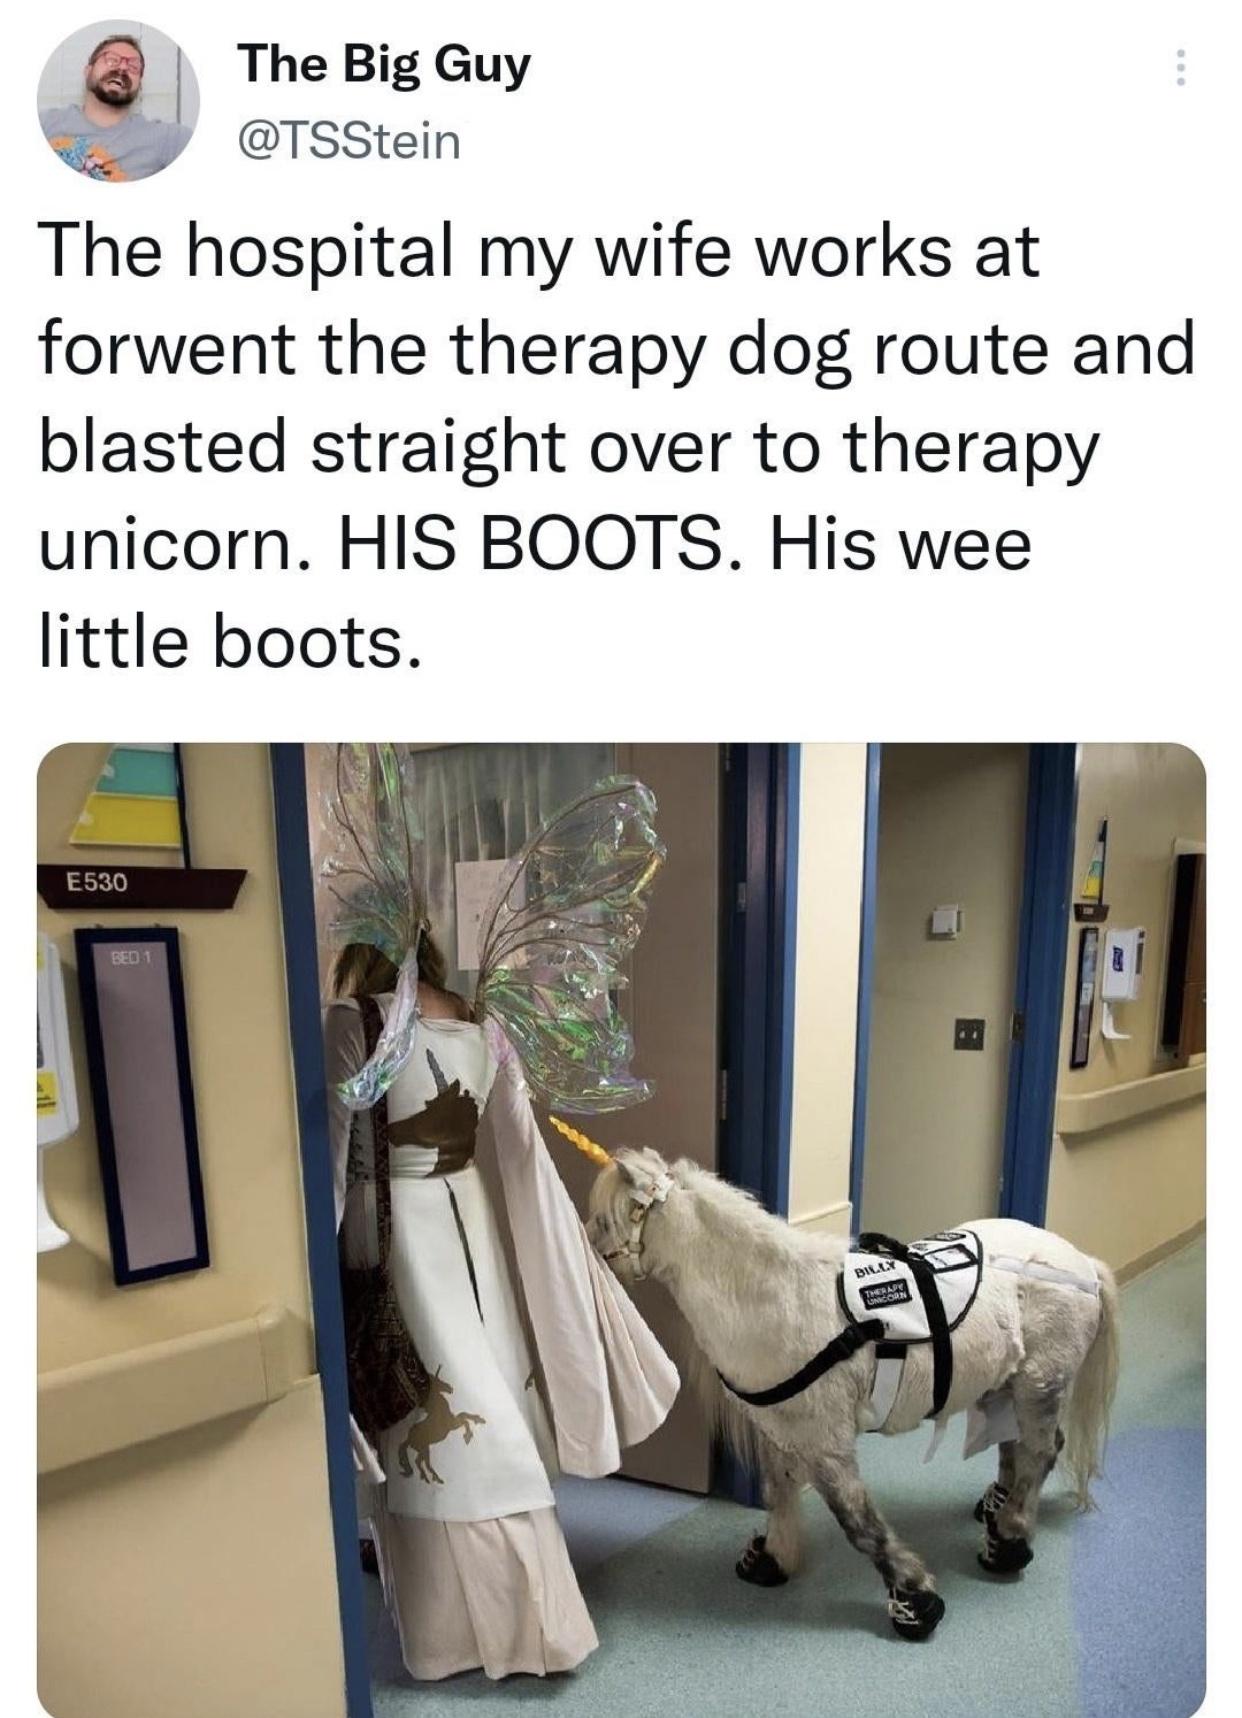 dank memes - therapy unicorn - The Big Guy The hospital my wife works at forwent the therapy dog route and blasted straight over to therapy unicorn. His Boots. His wee little boots. E530 Bed 1 Billx Toare Soon